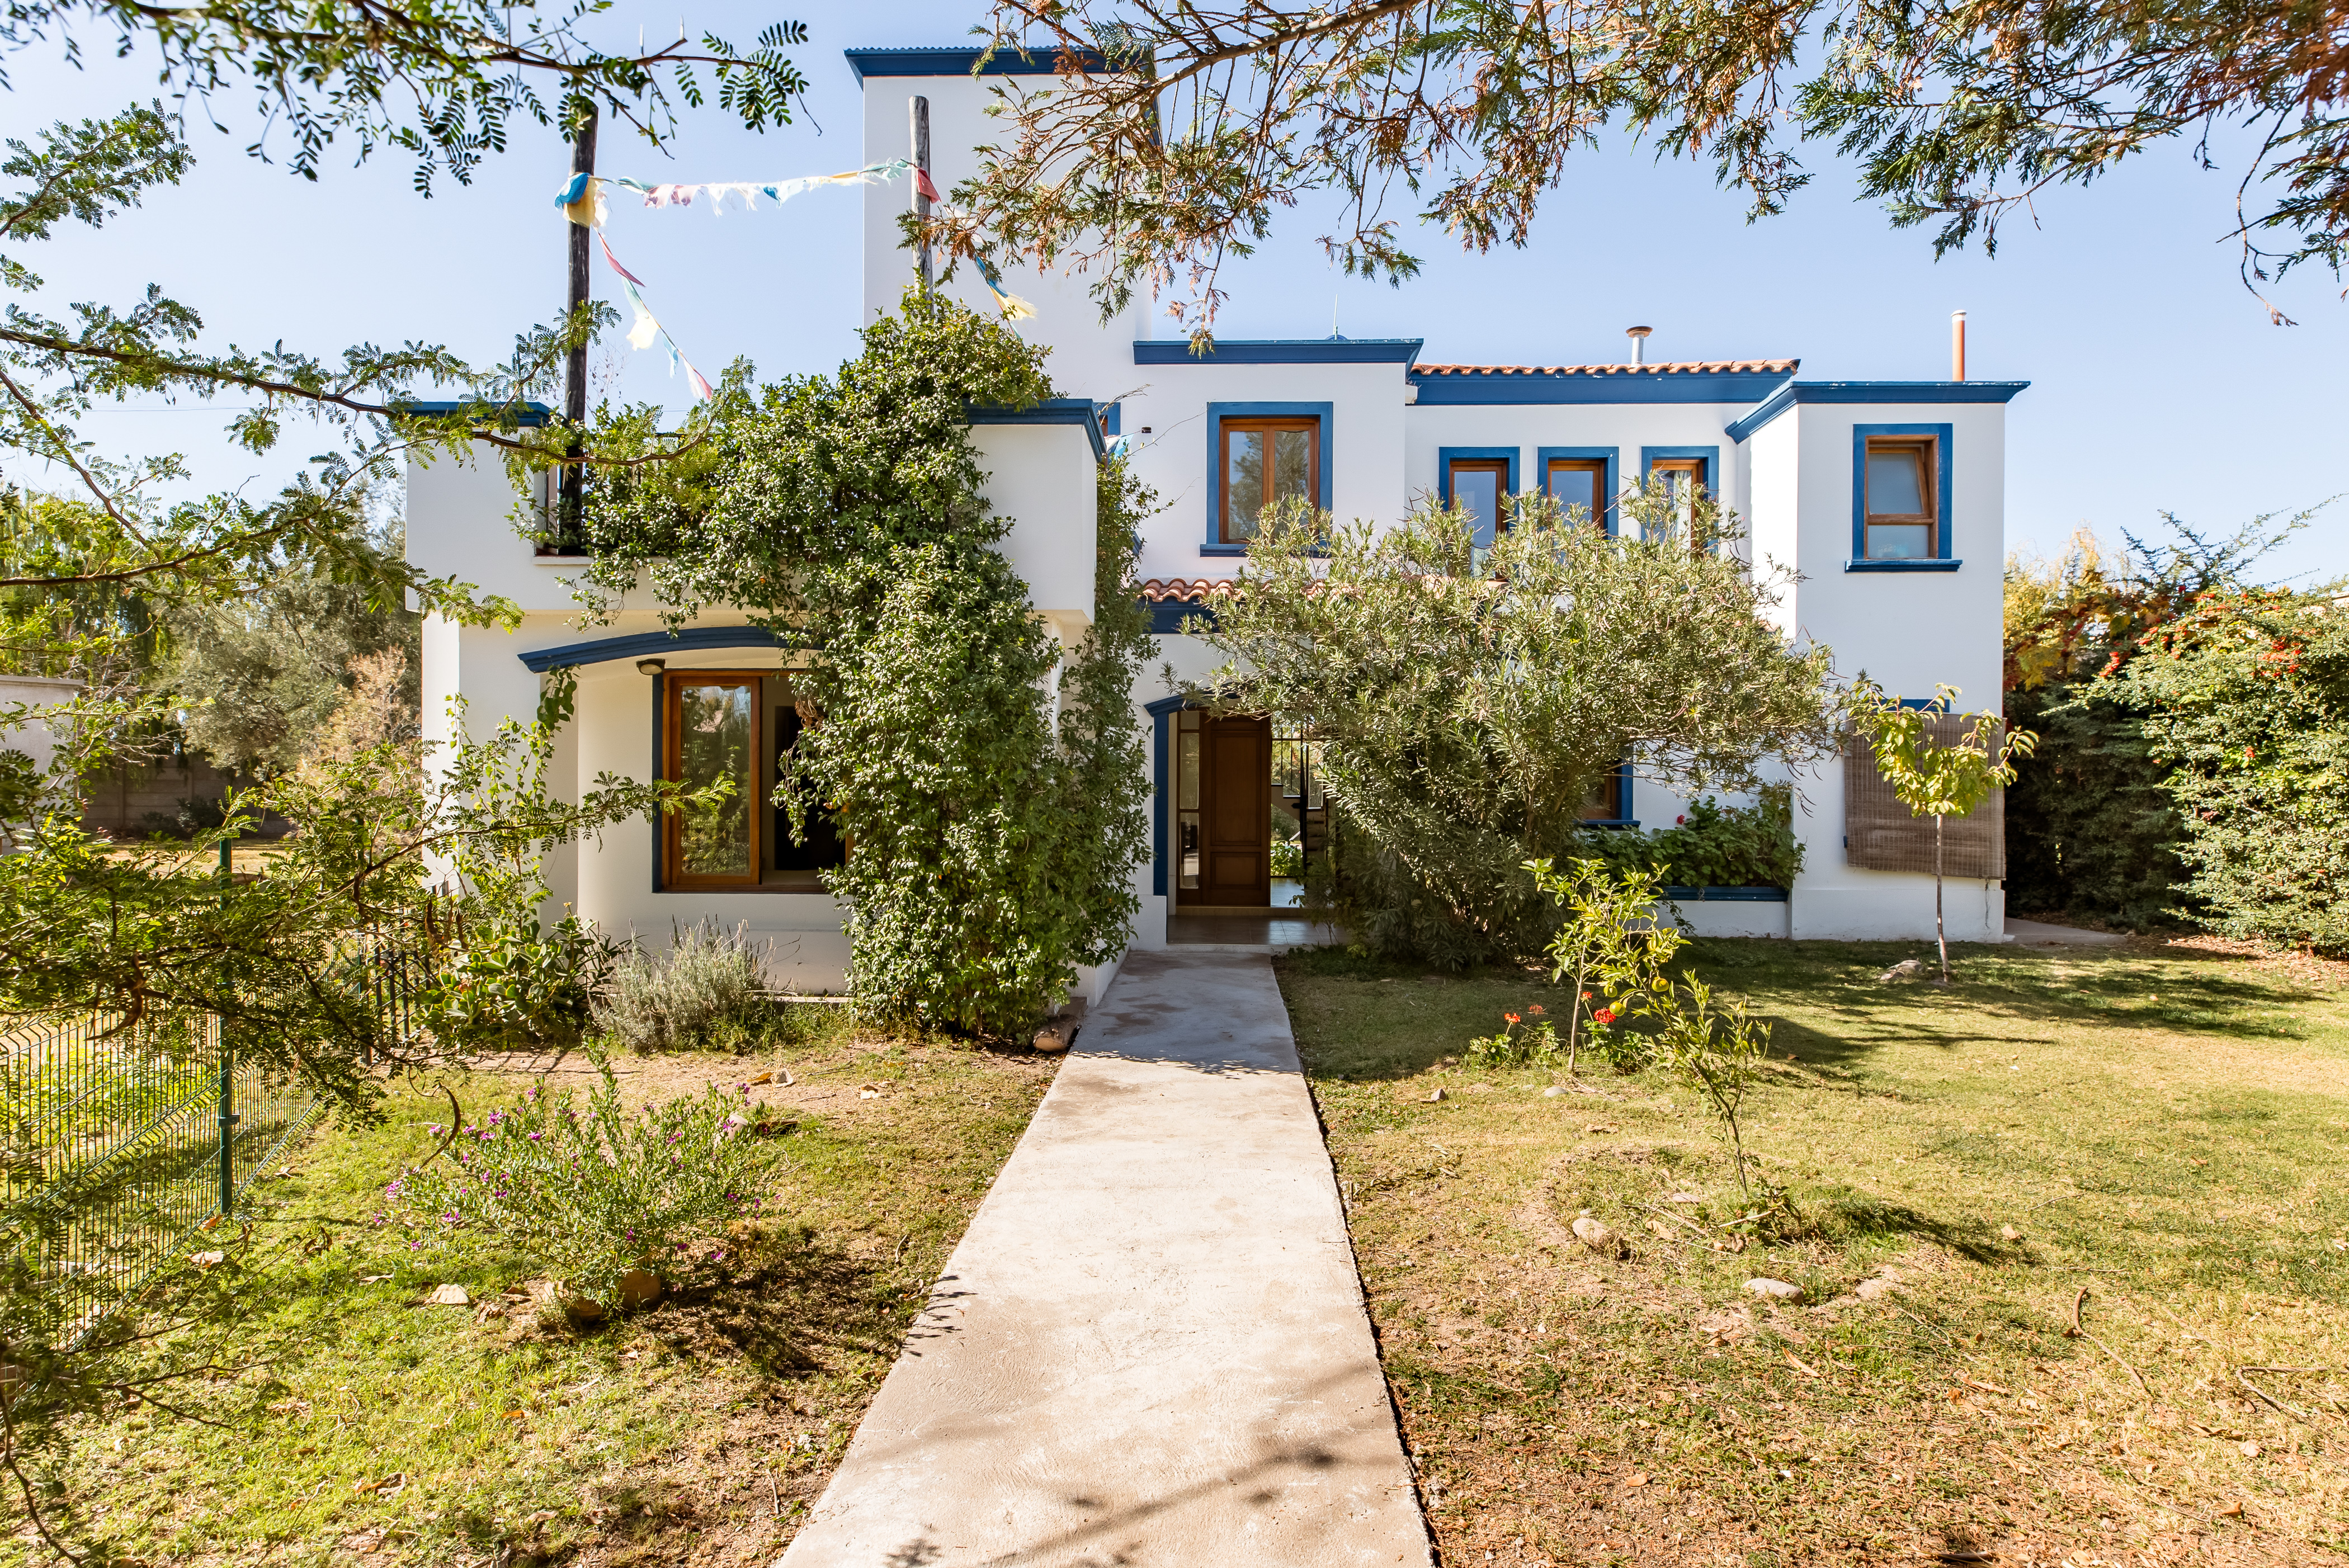 Front view of a white two floor home in the middle of Luján de Cuyo, Argentina.